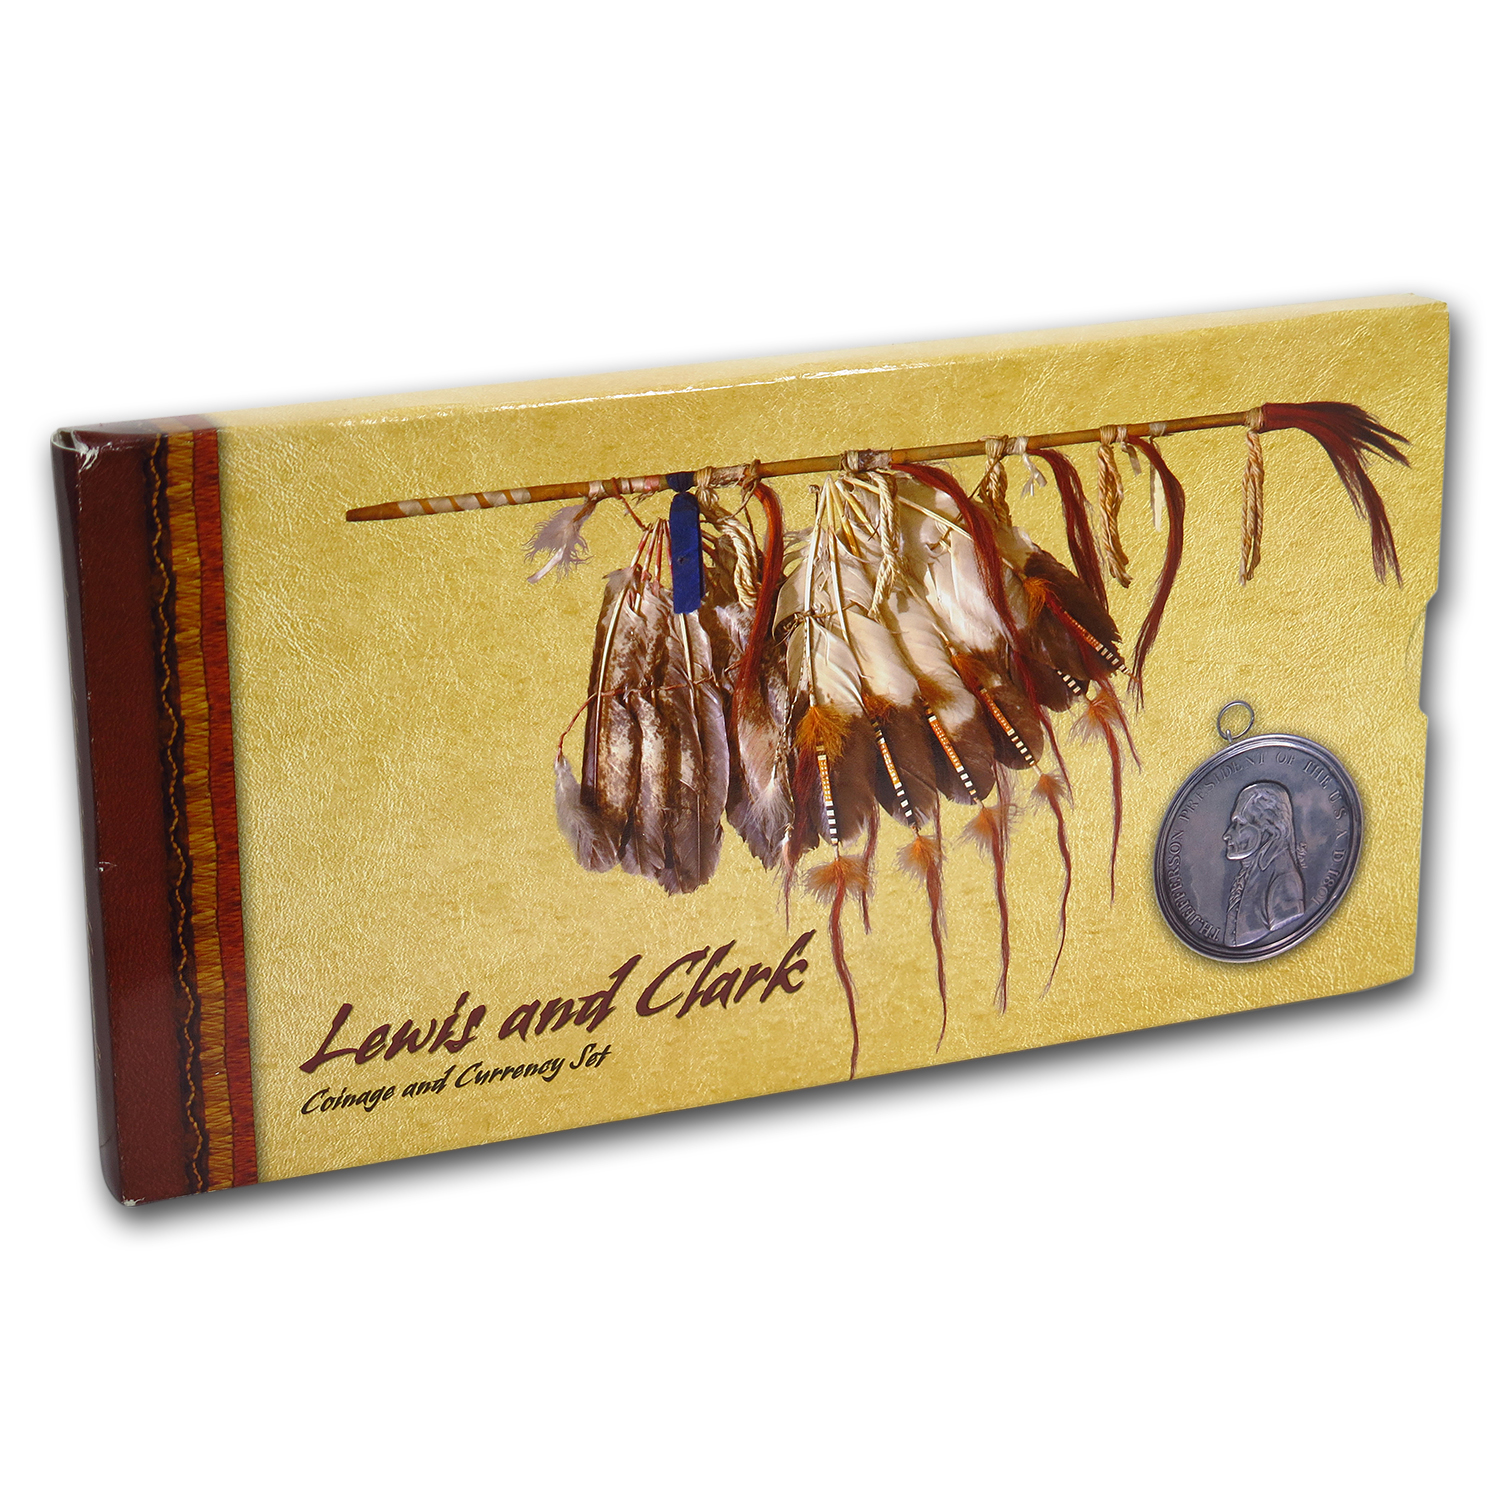 Buy 2004 Lewis & Clark Coin & Currency Set